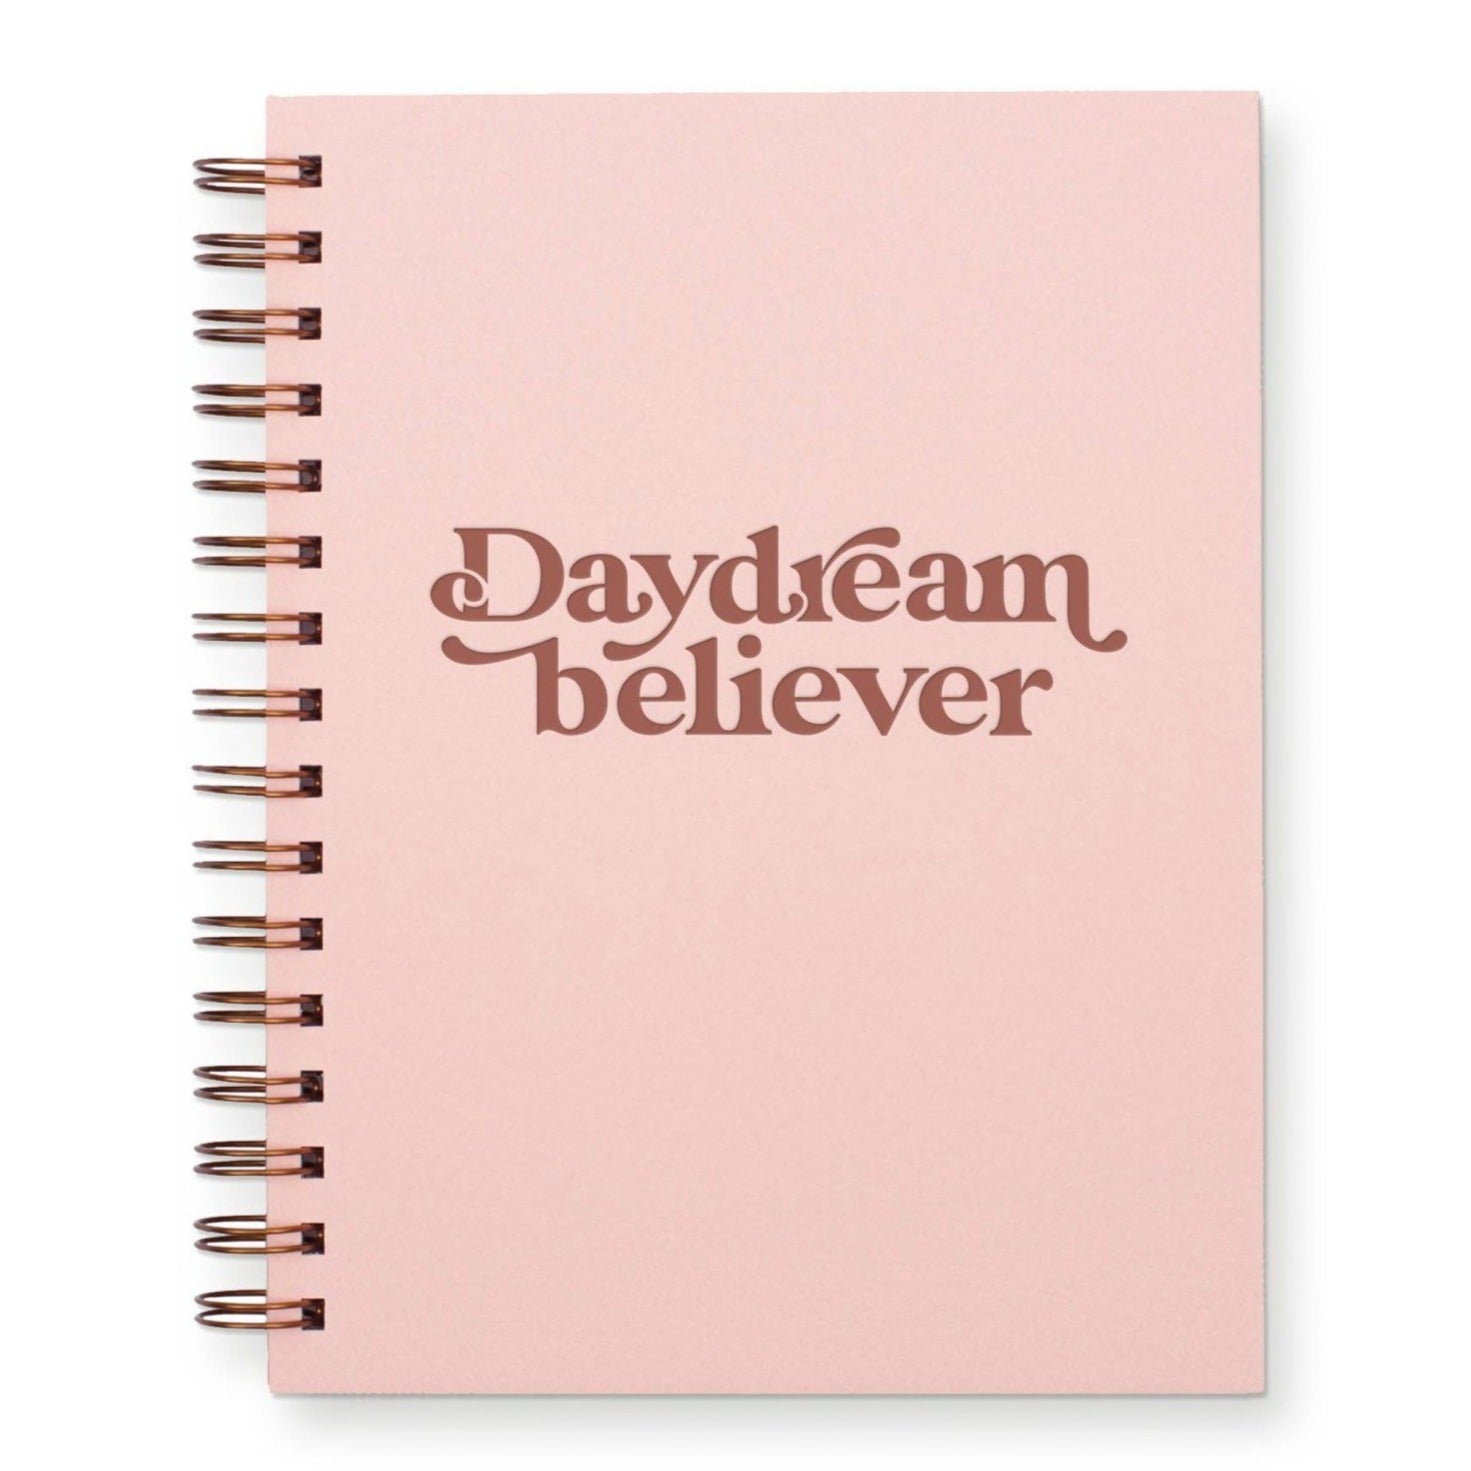 Daydream Believer Journal: Sunset Pink Cover | Terracotta Ink